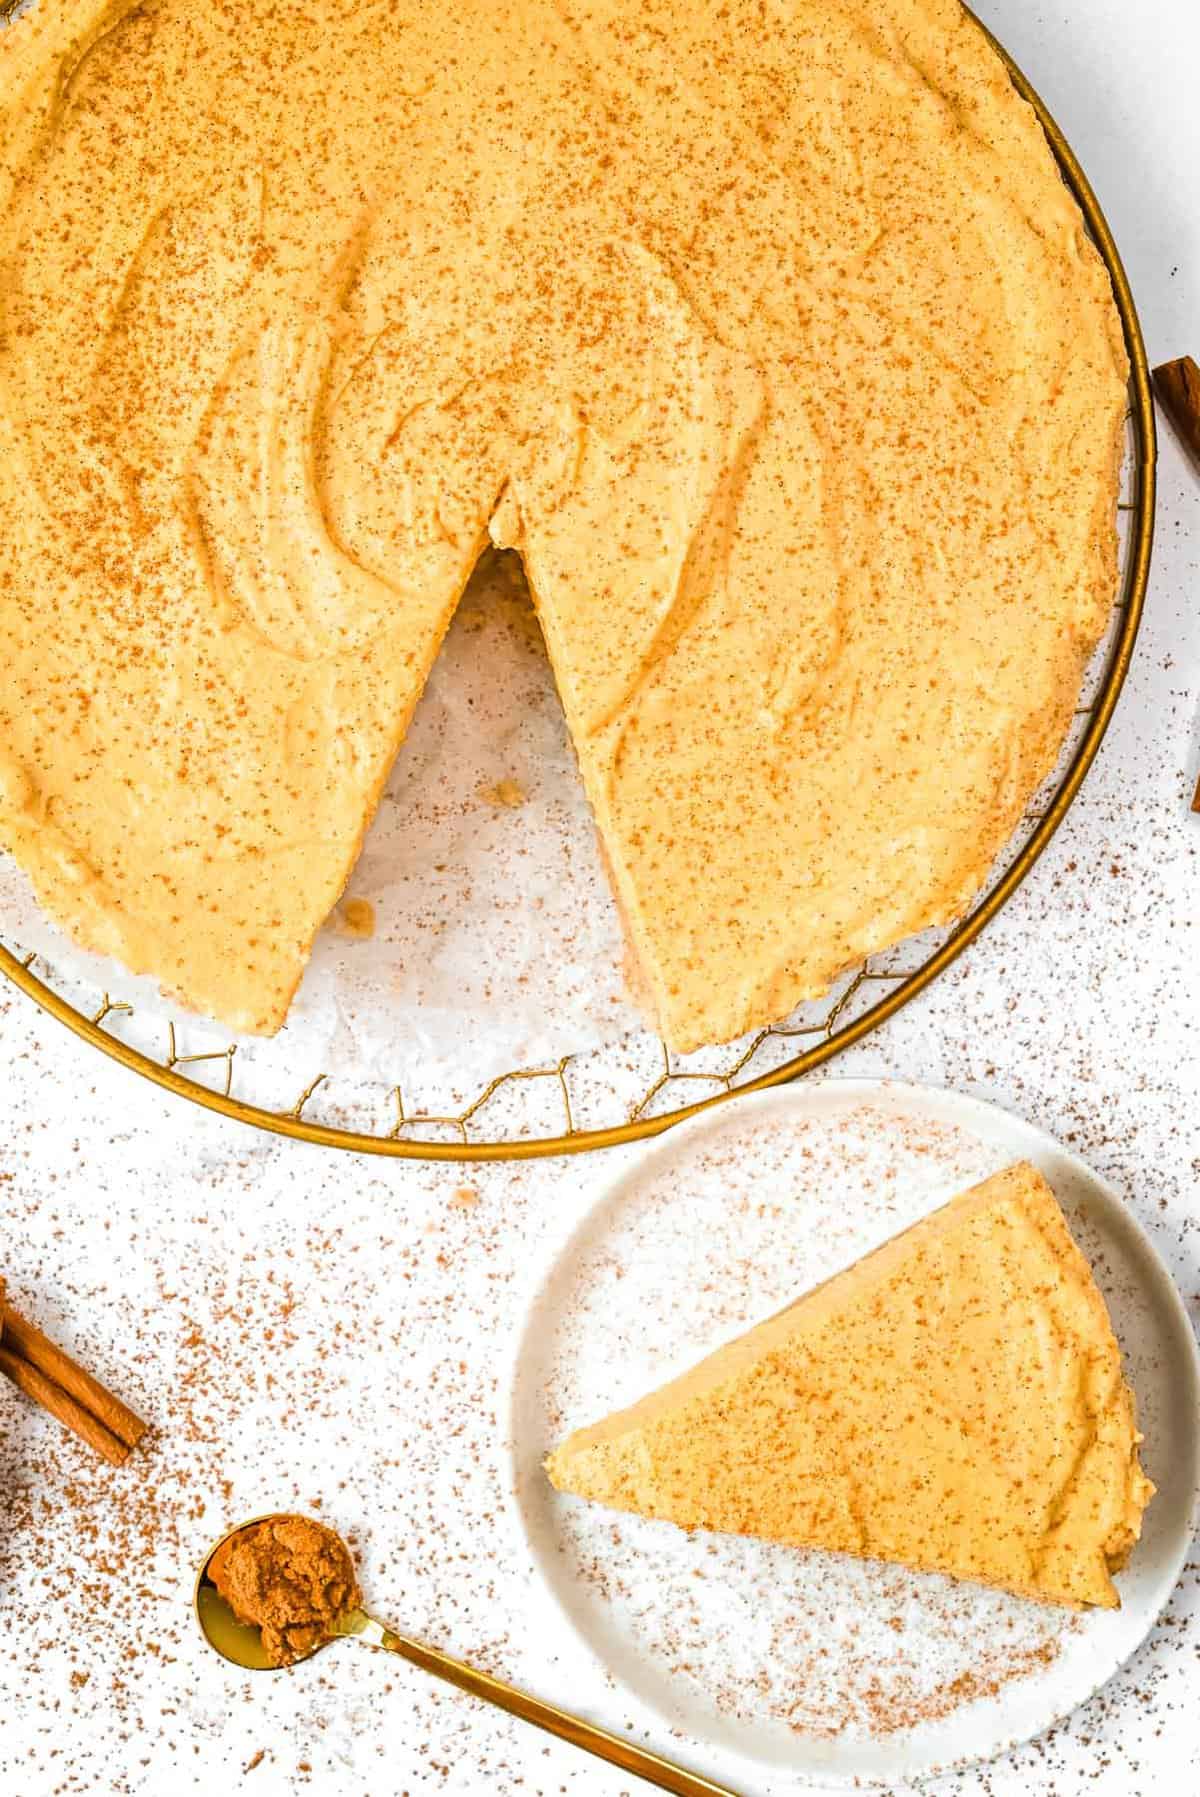 slice of pumpkin cheesecake next to full cheesecake on a white background.